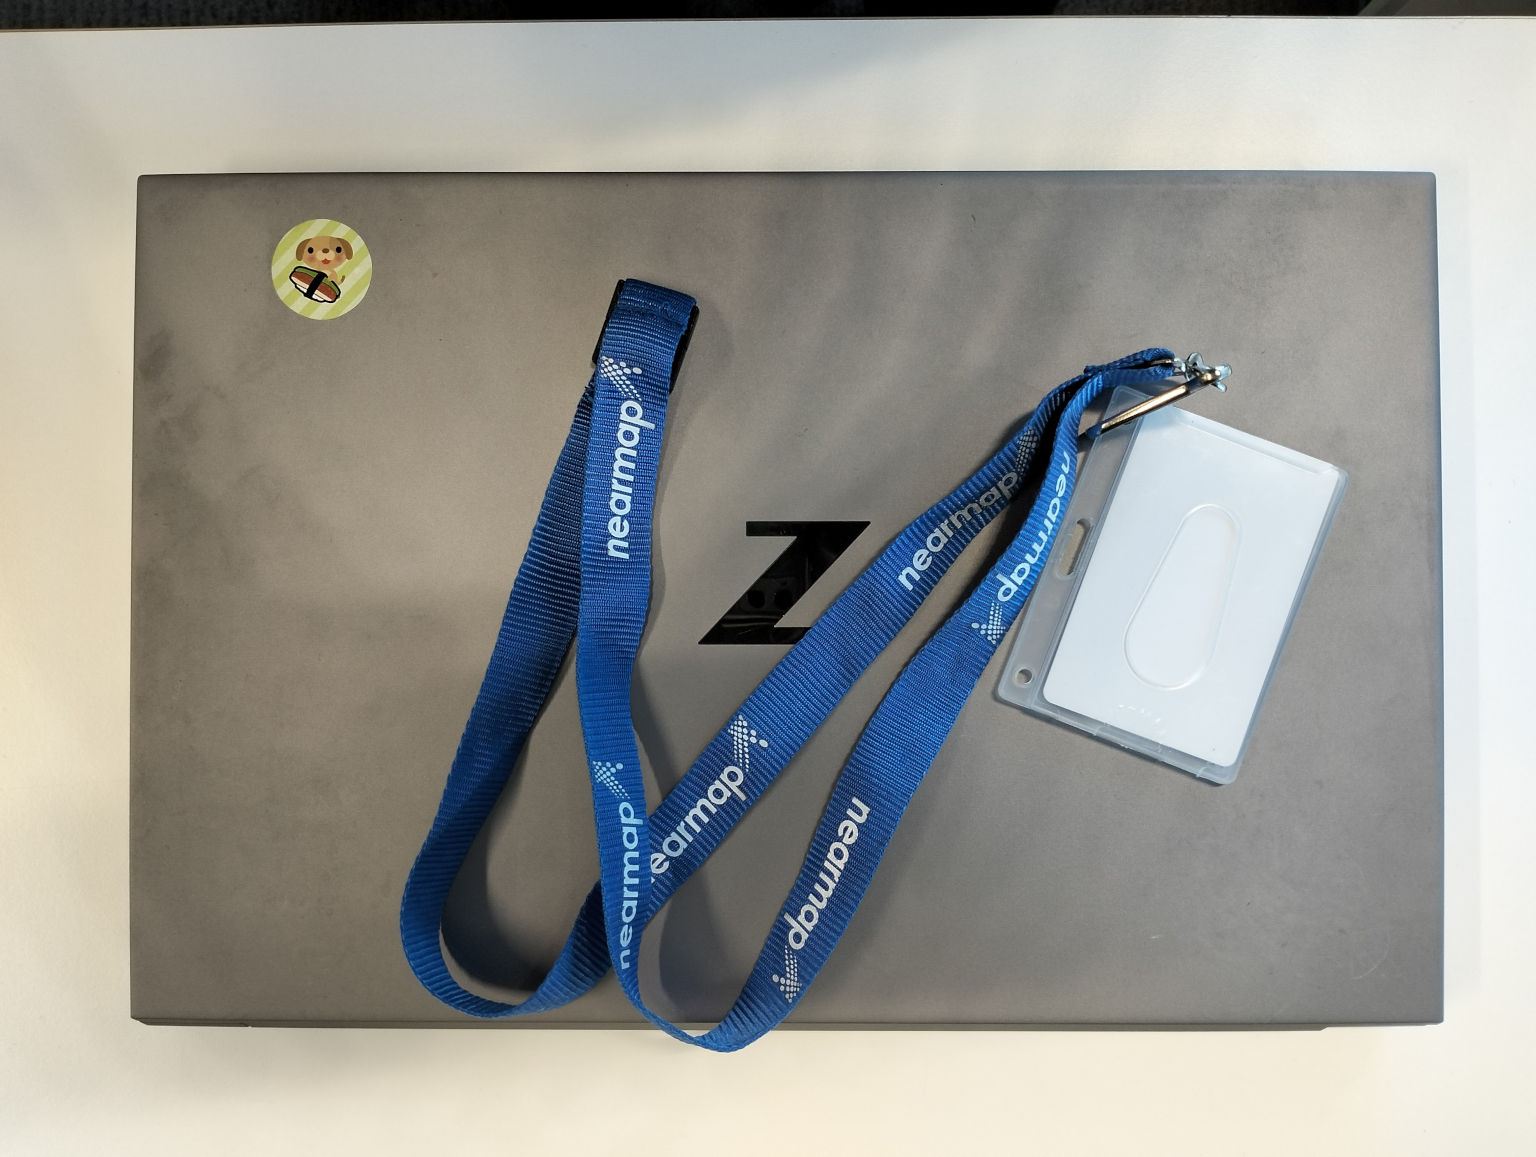 Laptop, with an access pass attached to a Nearmap lanyard on top of it.